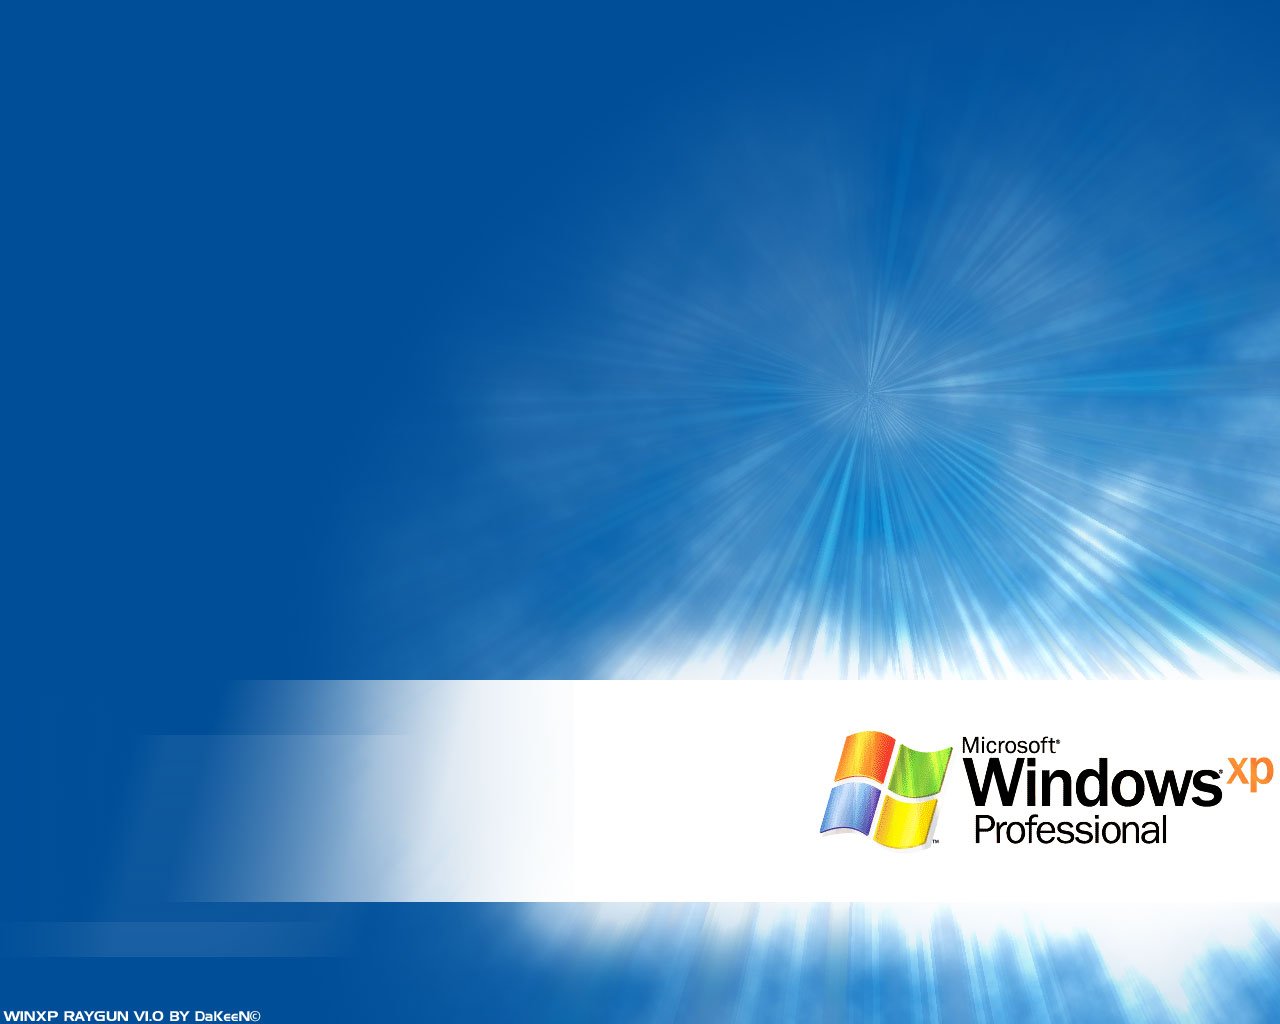 Windows Xp Wallpaper Pictures Photos And